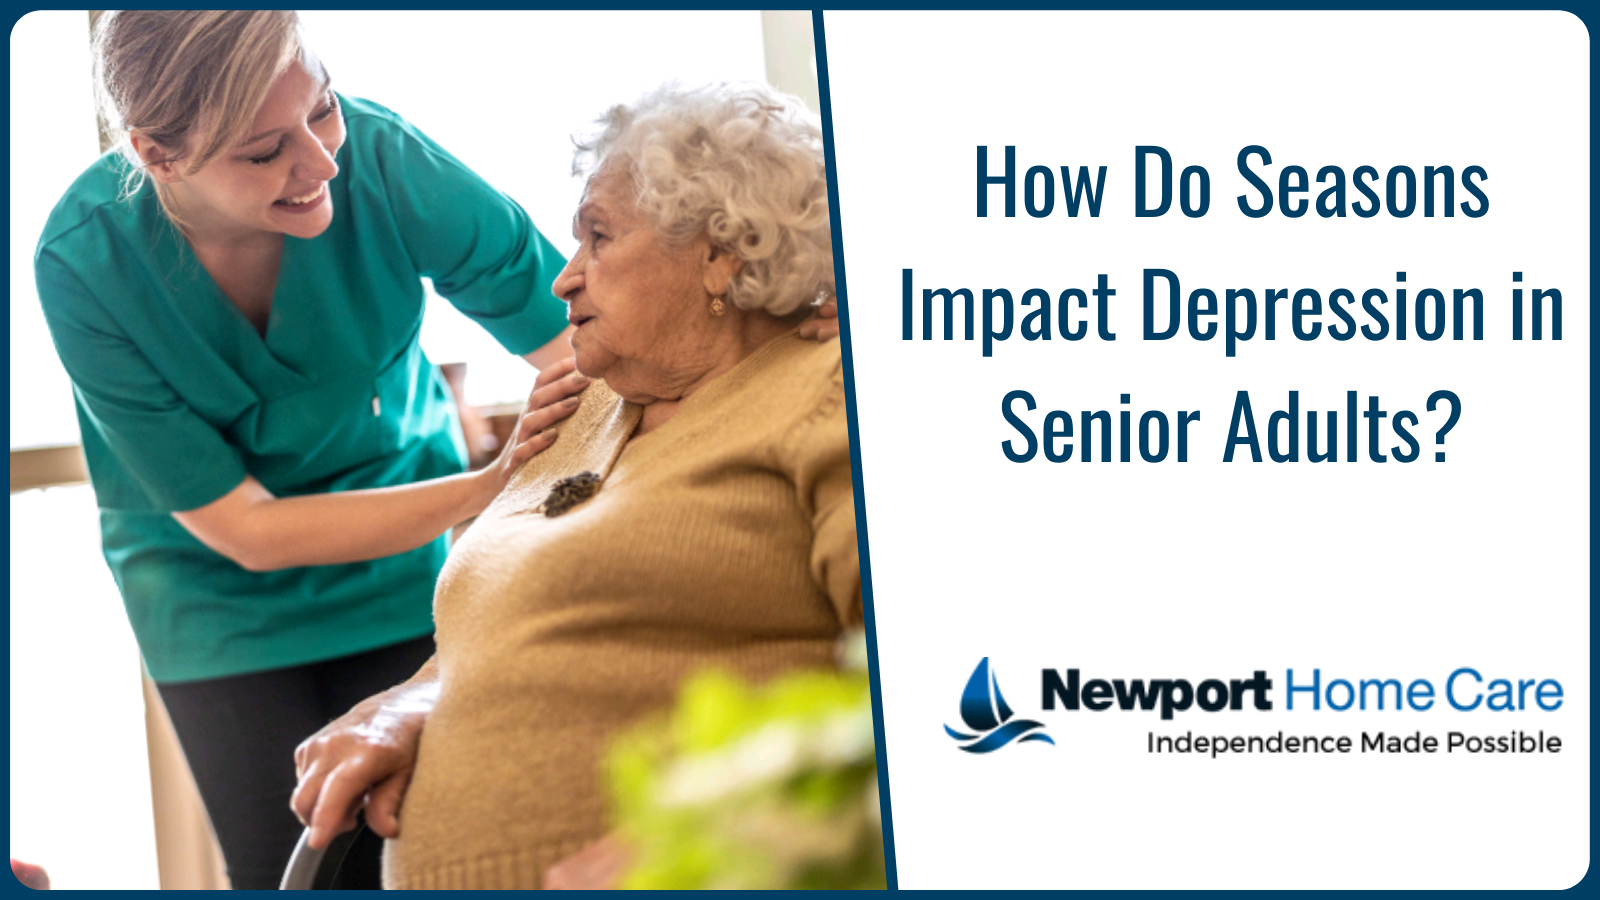 How Do Seasons Impact Depression in Senior Adults?